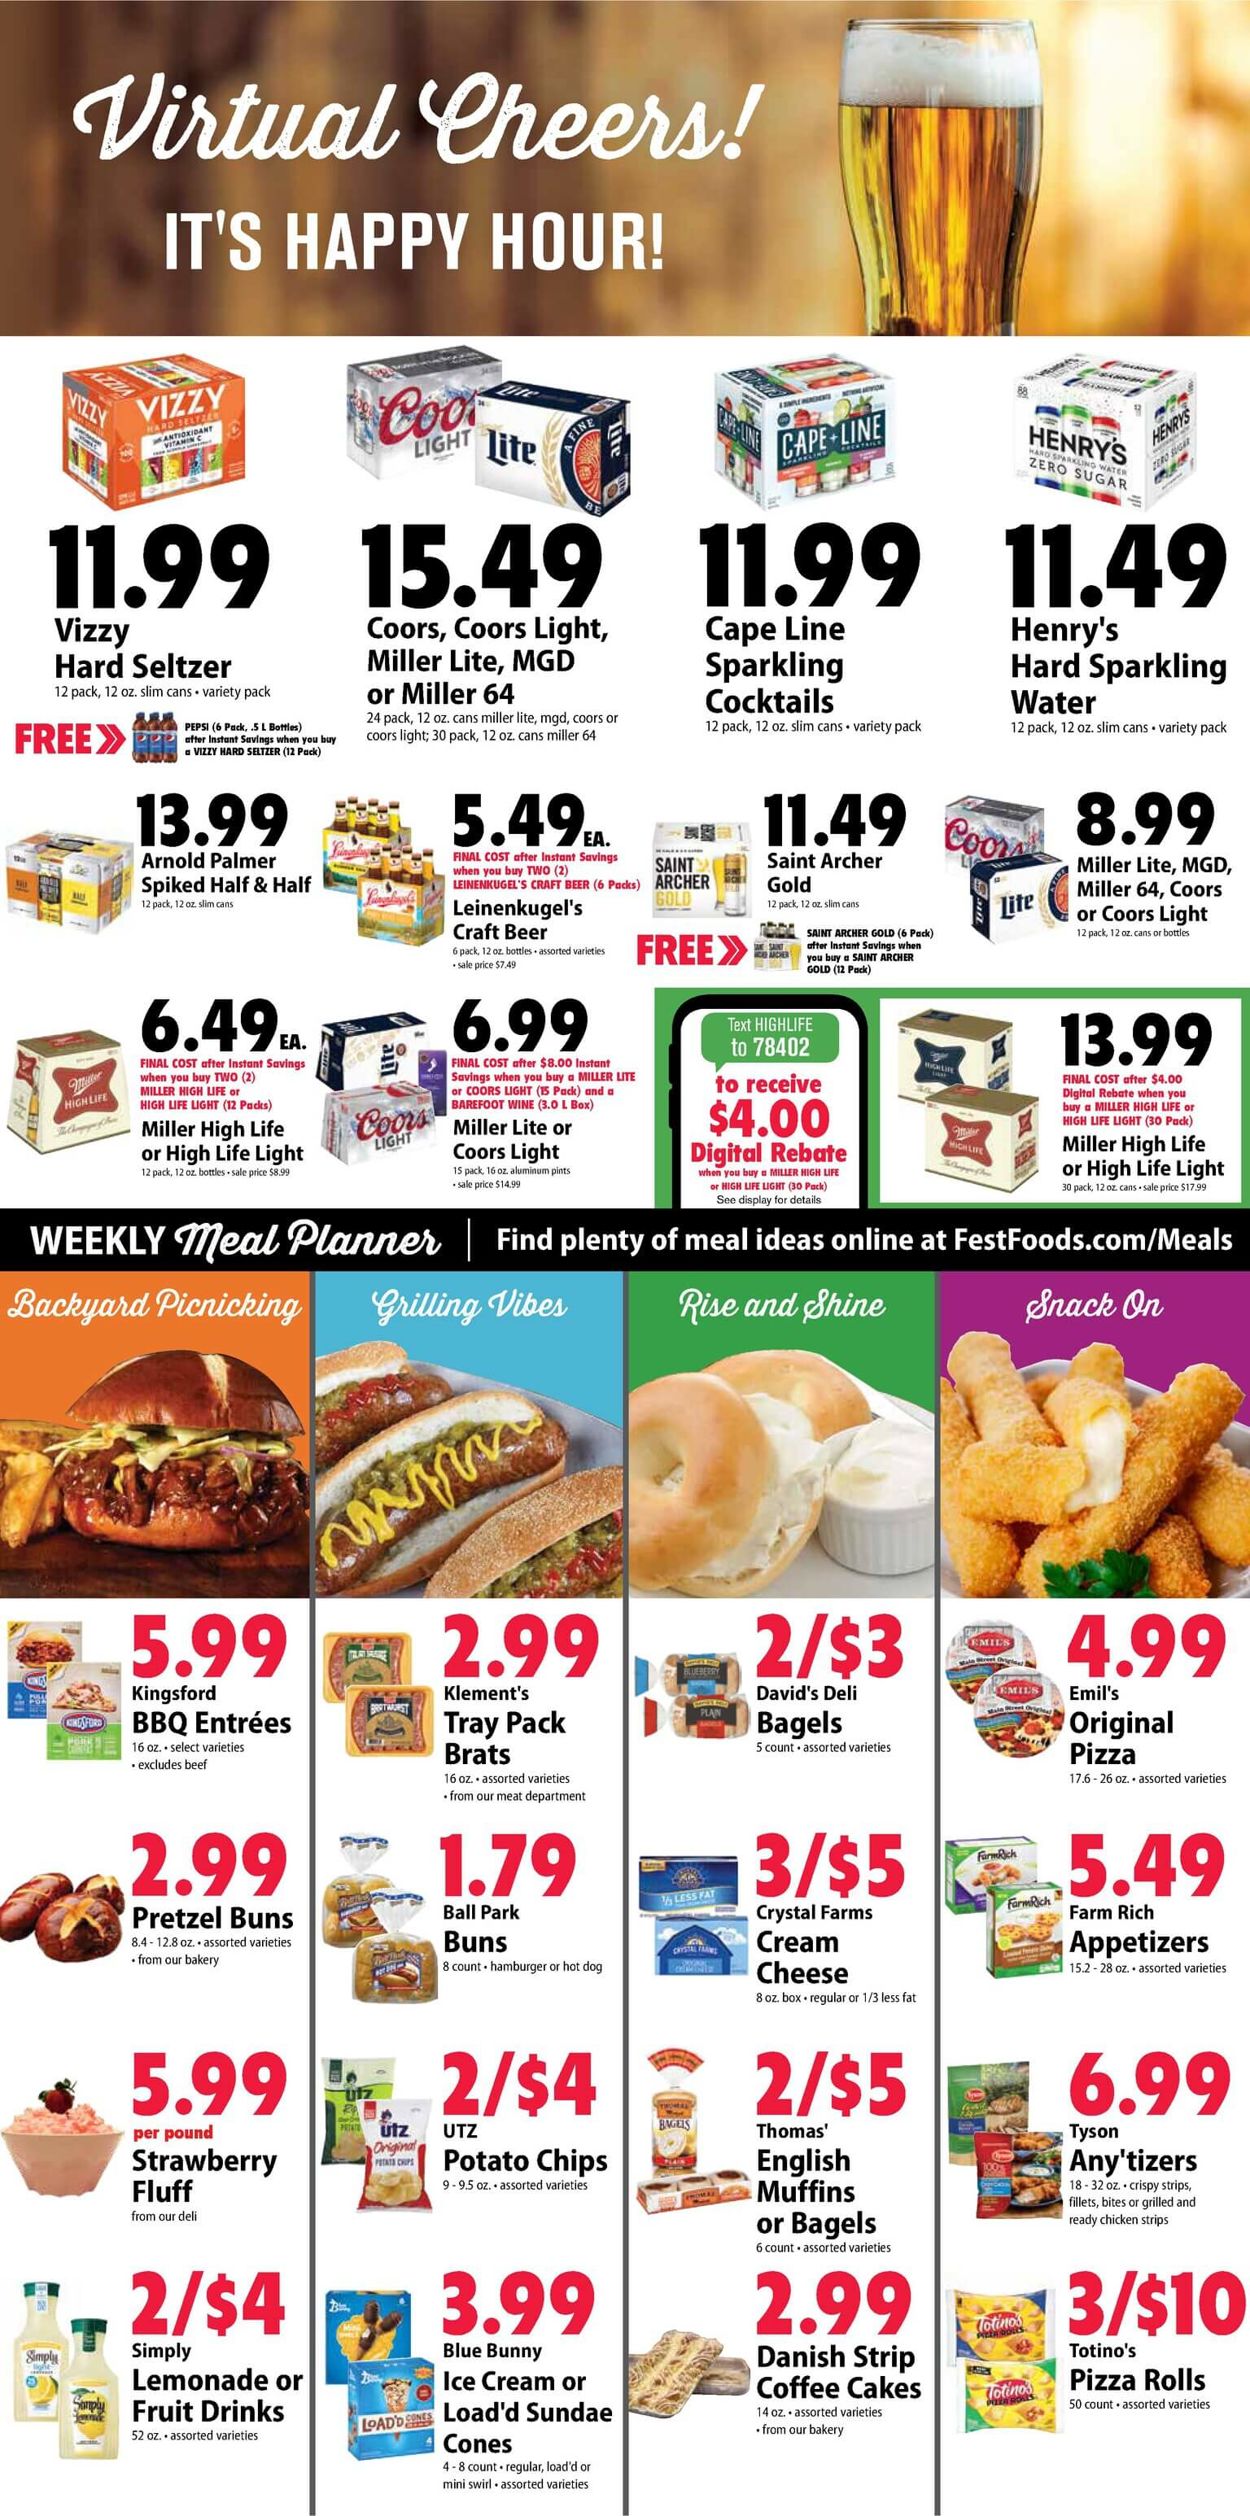 Festival Foods Current weekly ad 05/13 - 05/19/2020 [4] - frequent-ads.com